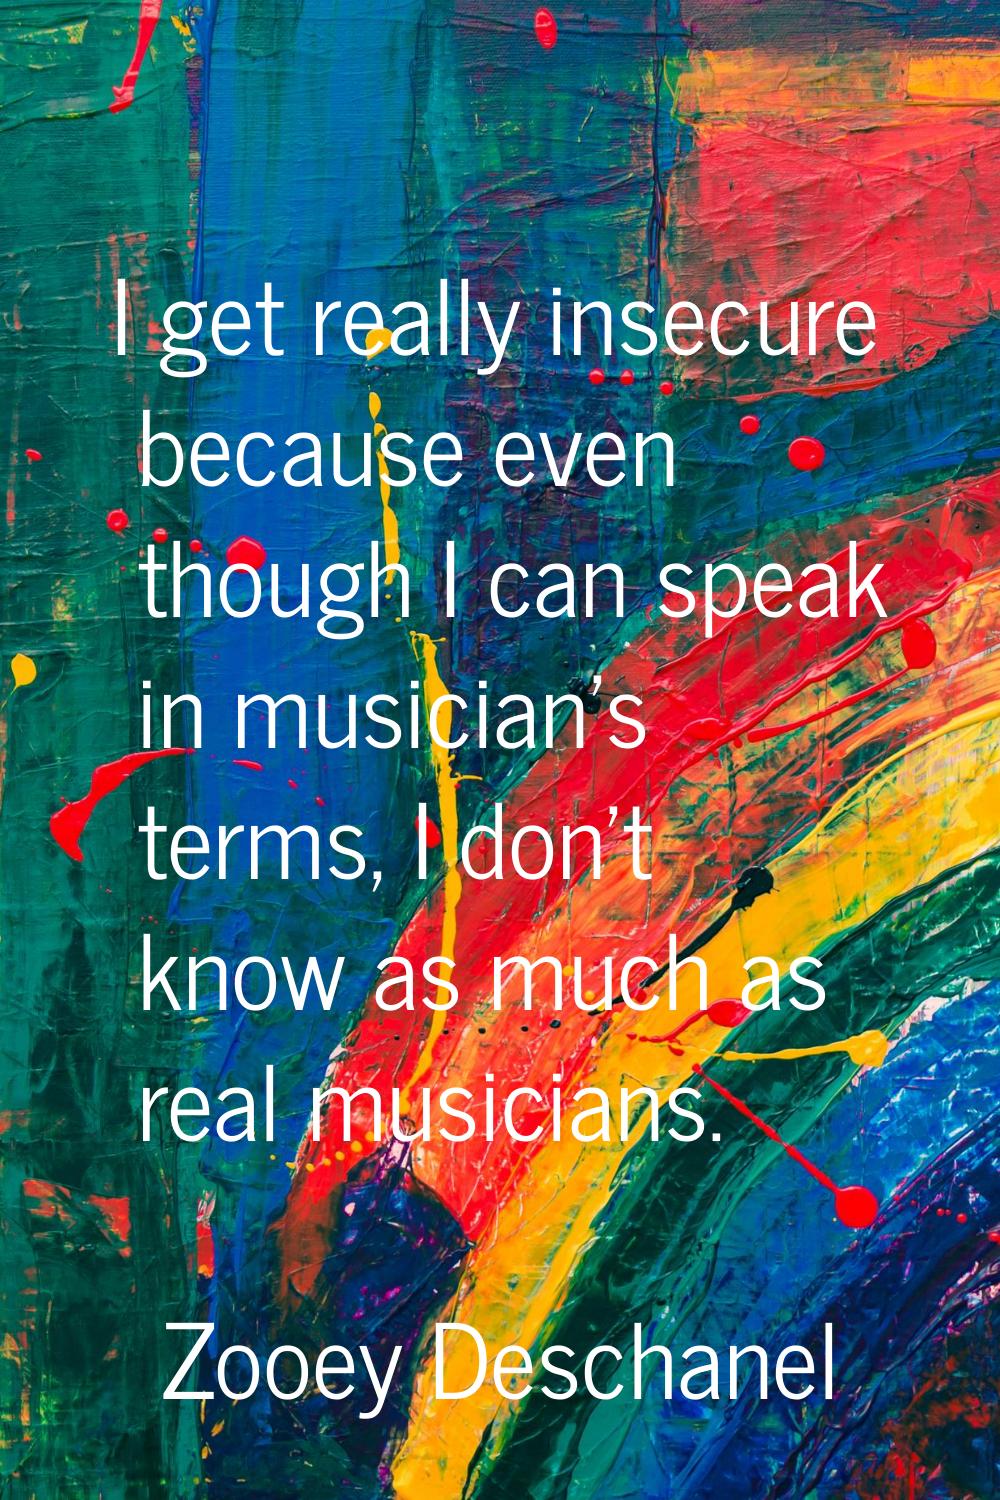 I get really insecure because even though I can speak in musician's terms, I don't know as much as 